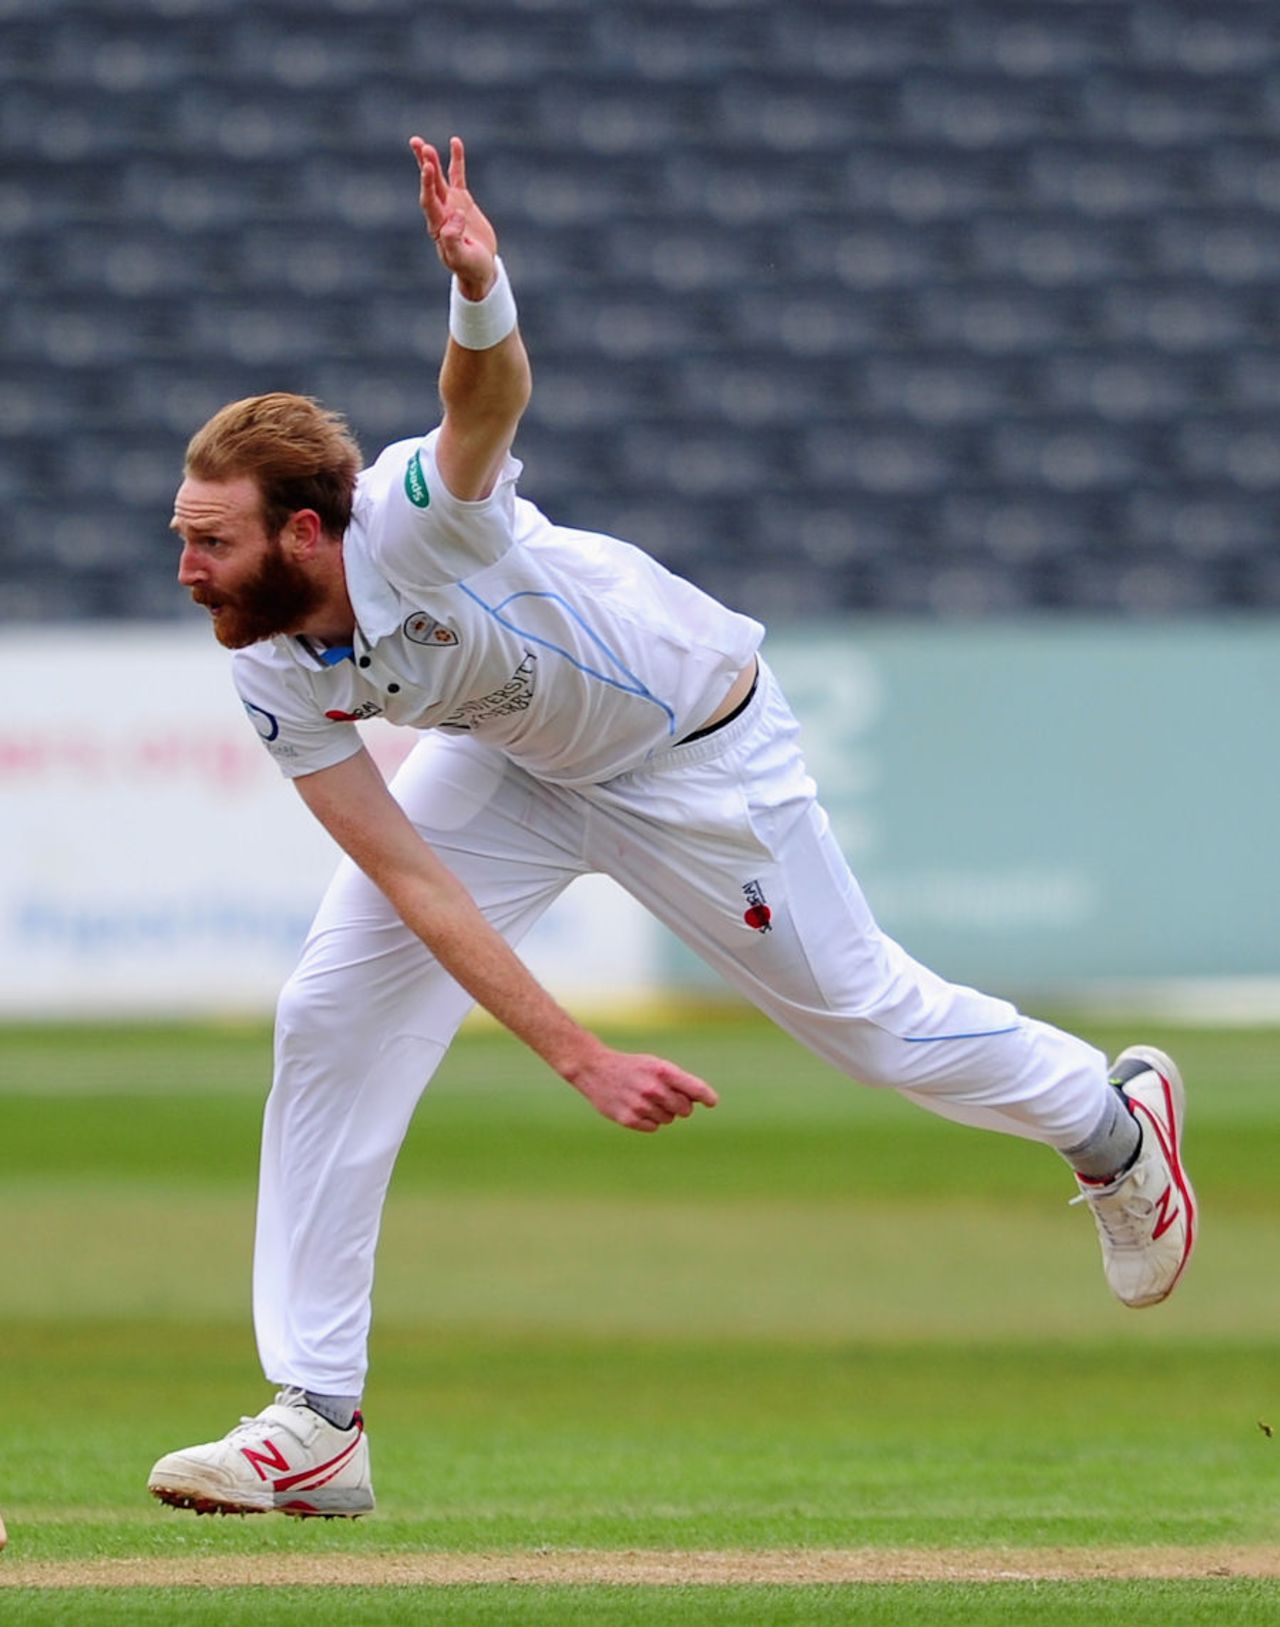 Andy Carter bowling for Derbyshire, Gloucestershire v Derbyshire, Specsavers Championship Division Two, April 19, 2016